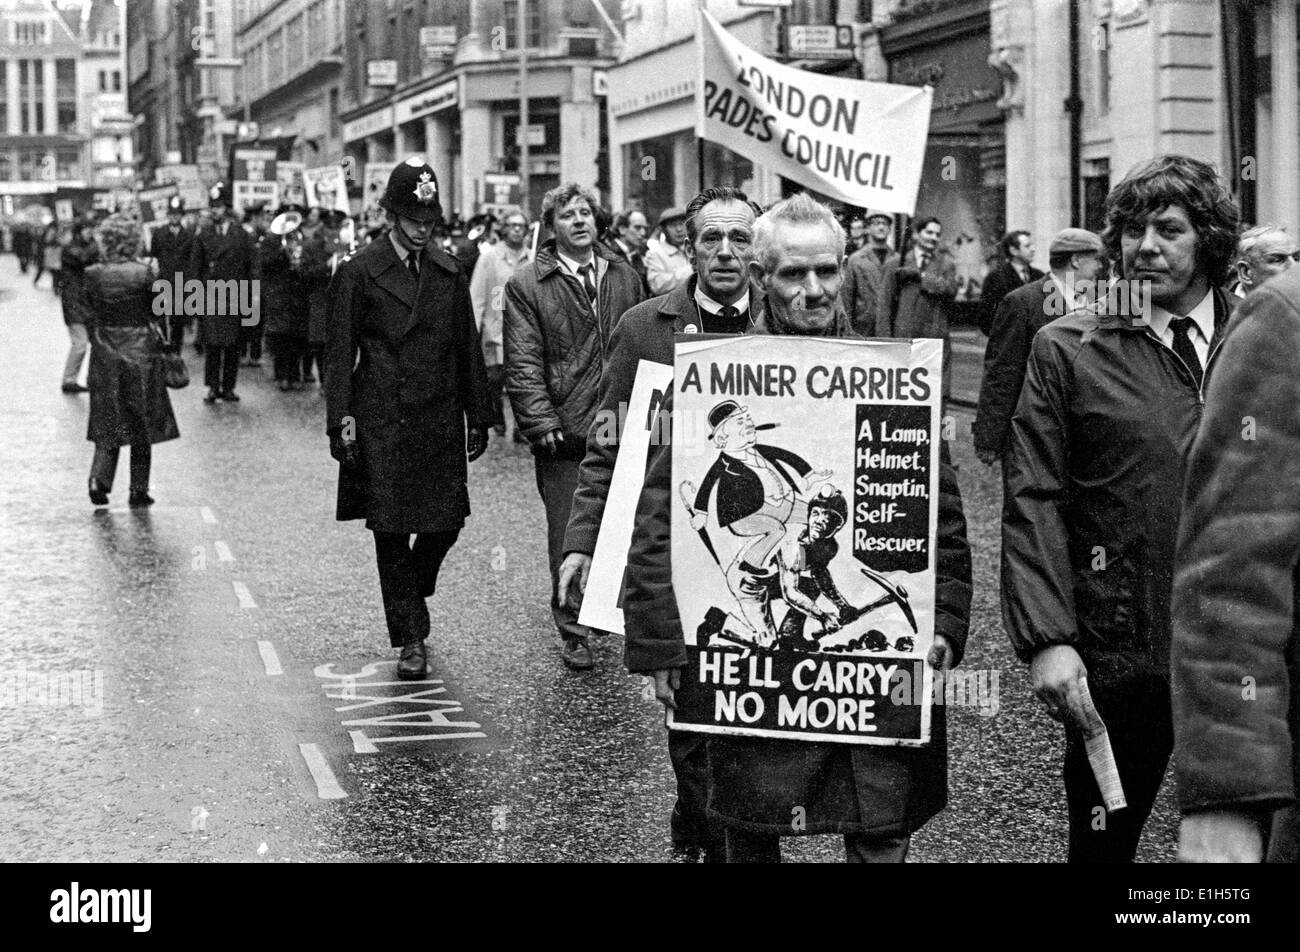 Striking coal miners marching in London, March 1972 Stock Photo